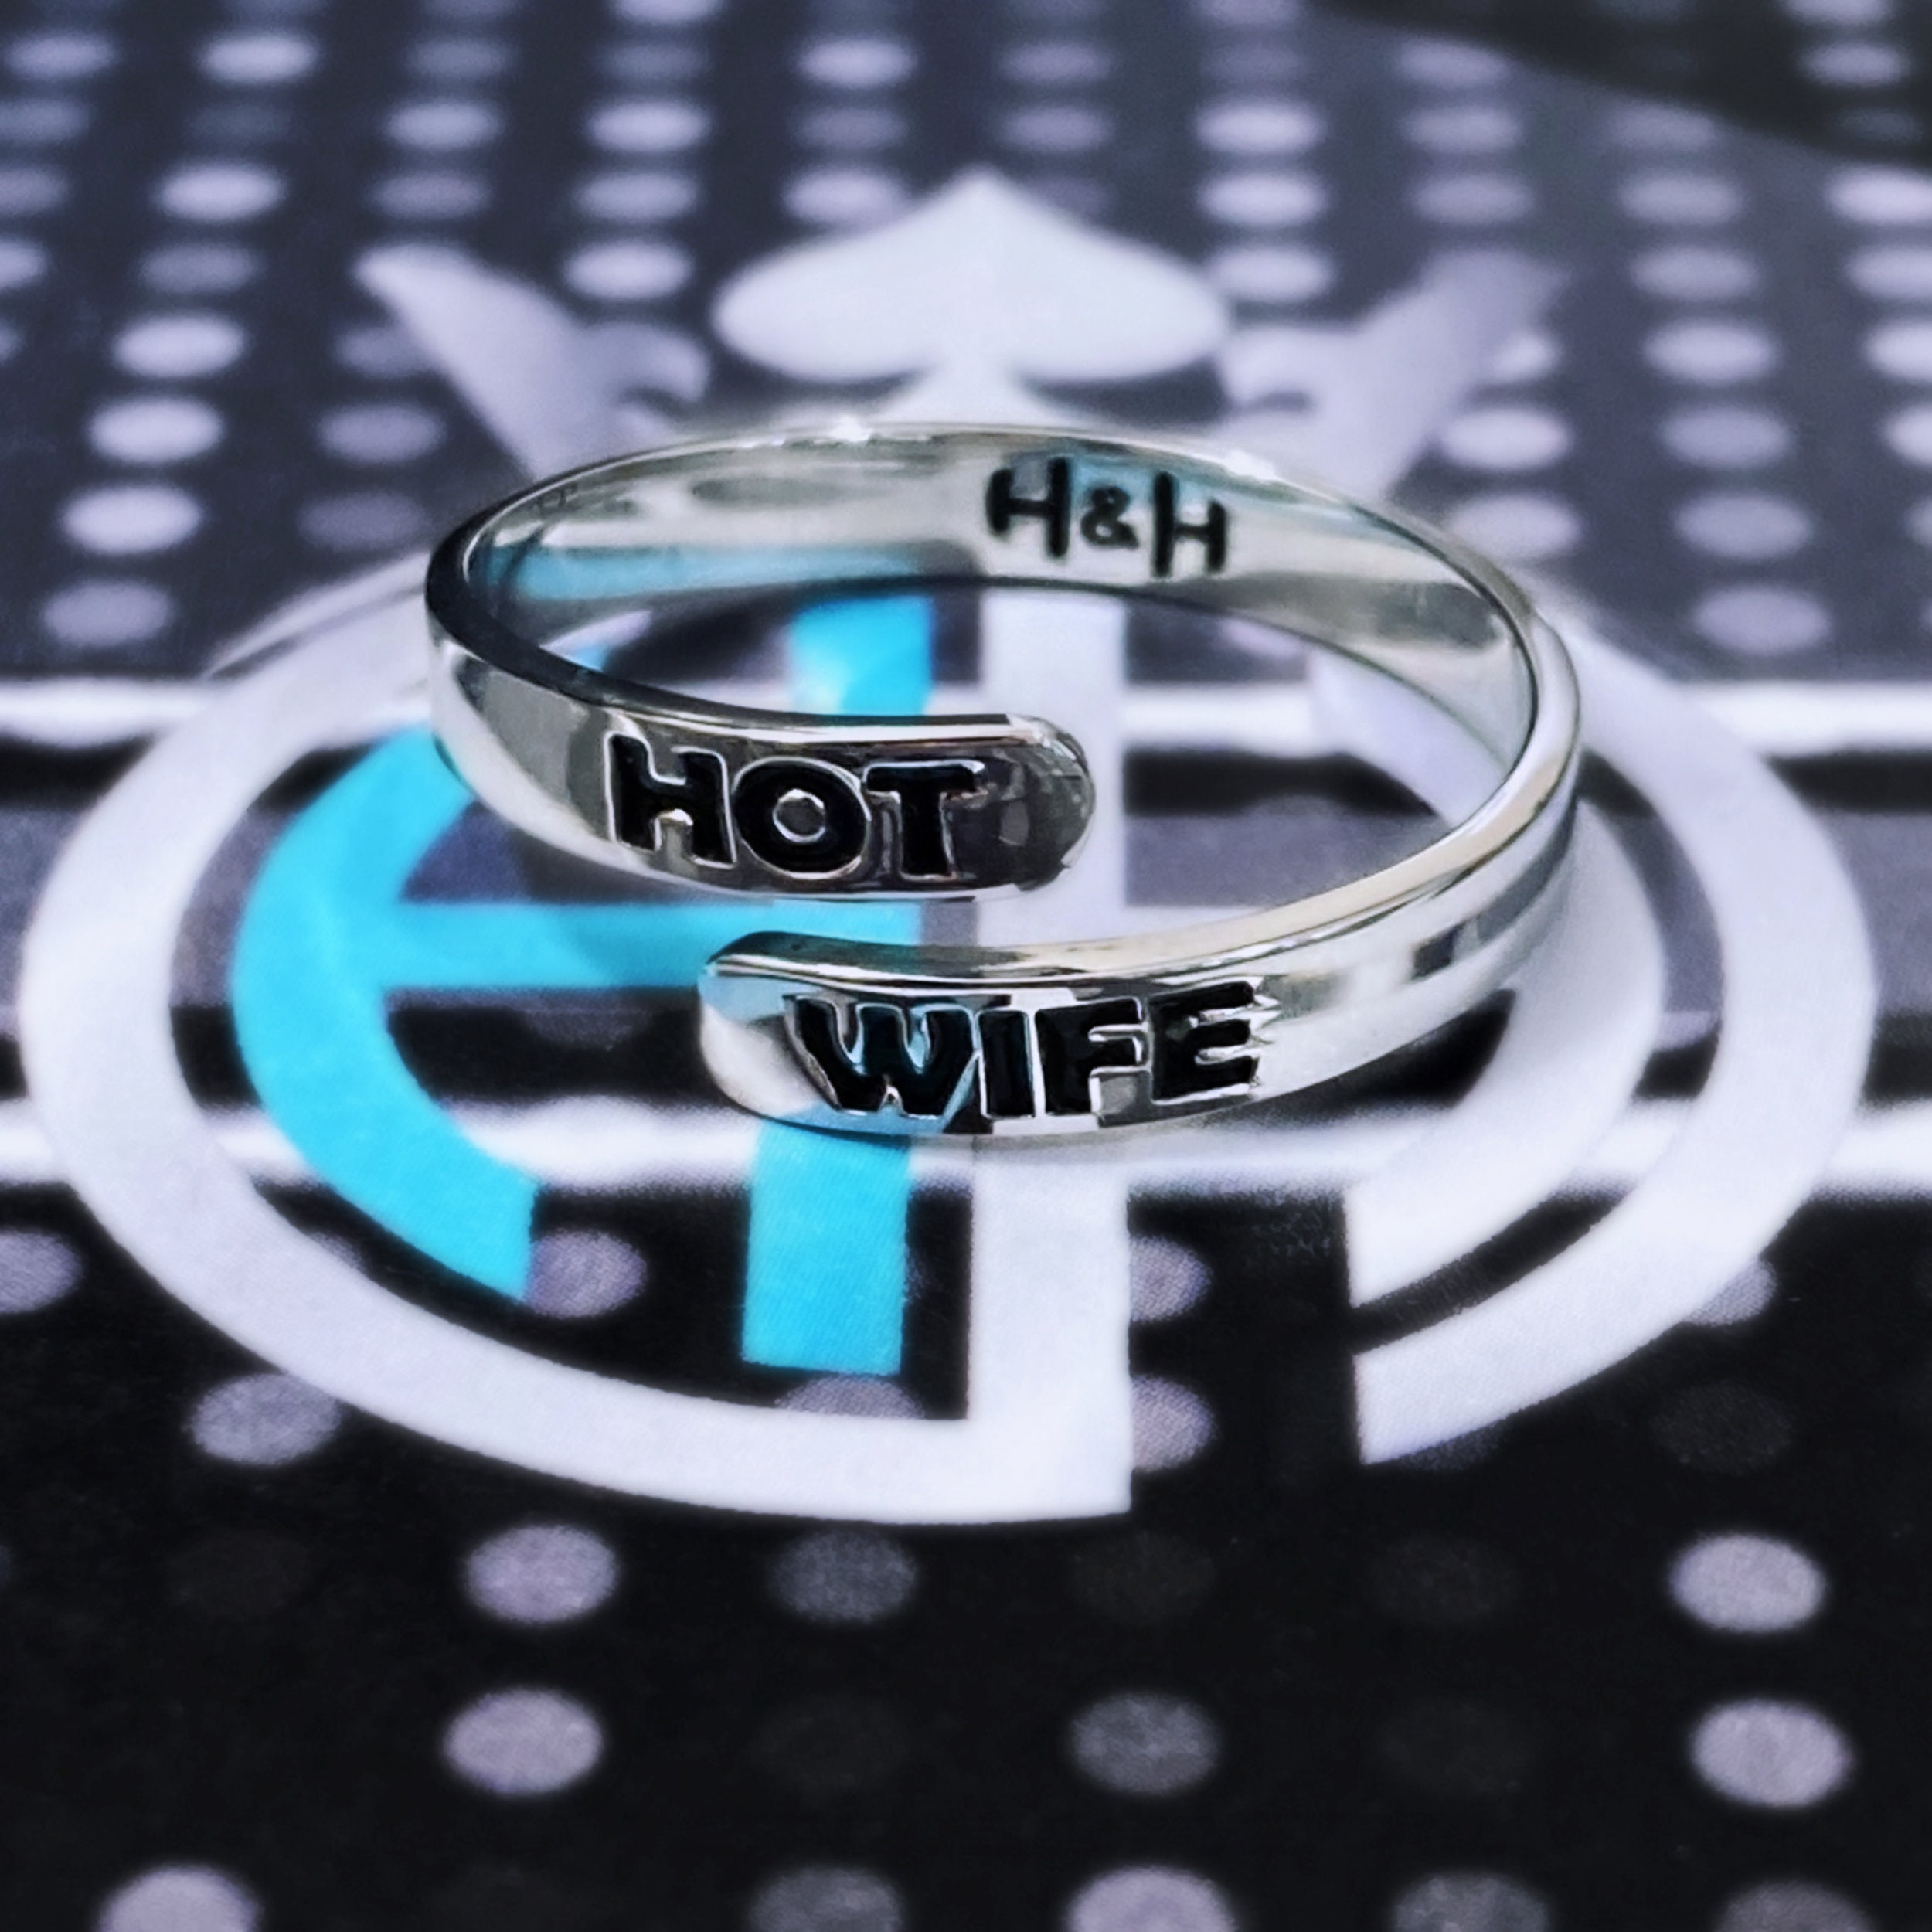 Hotwife Adjustable Stainless Steel Ring MFM Threesome photo